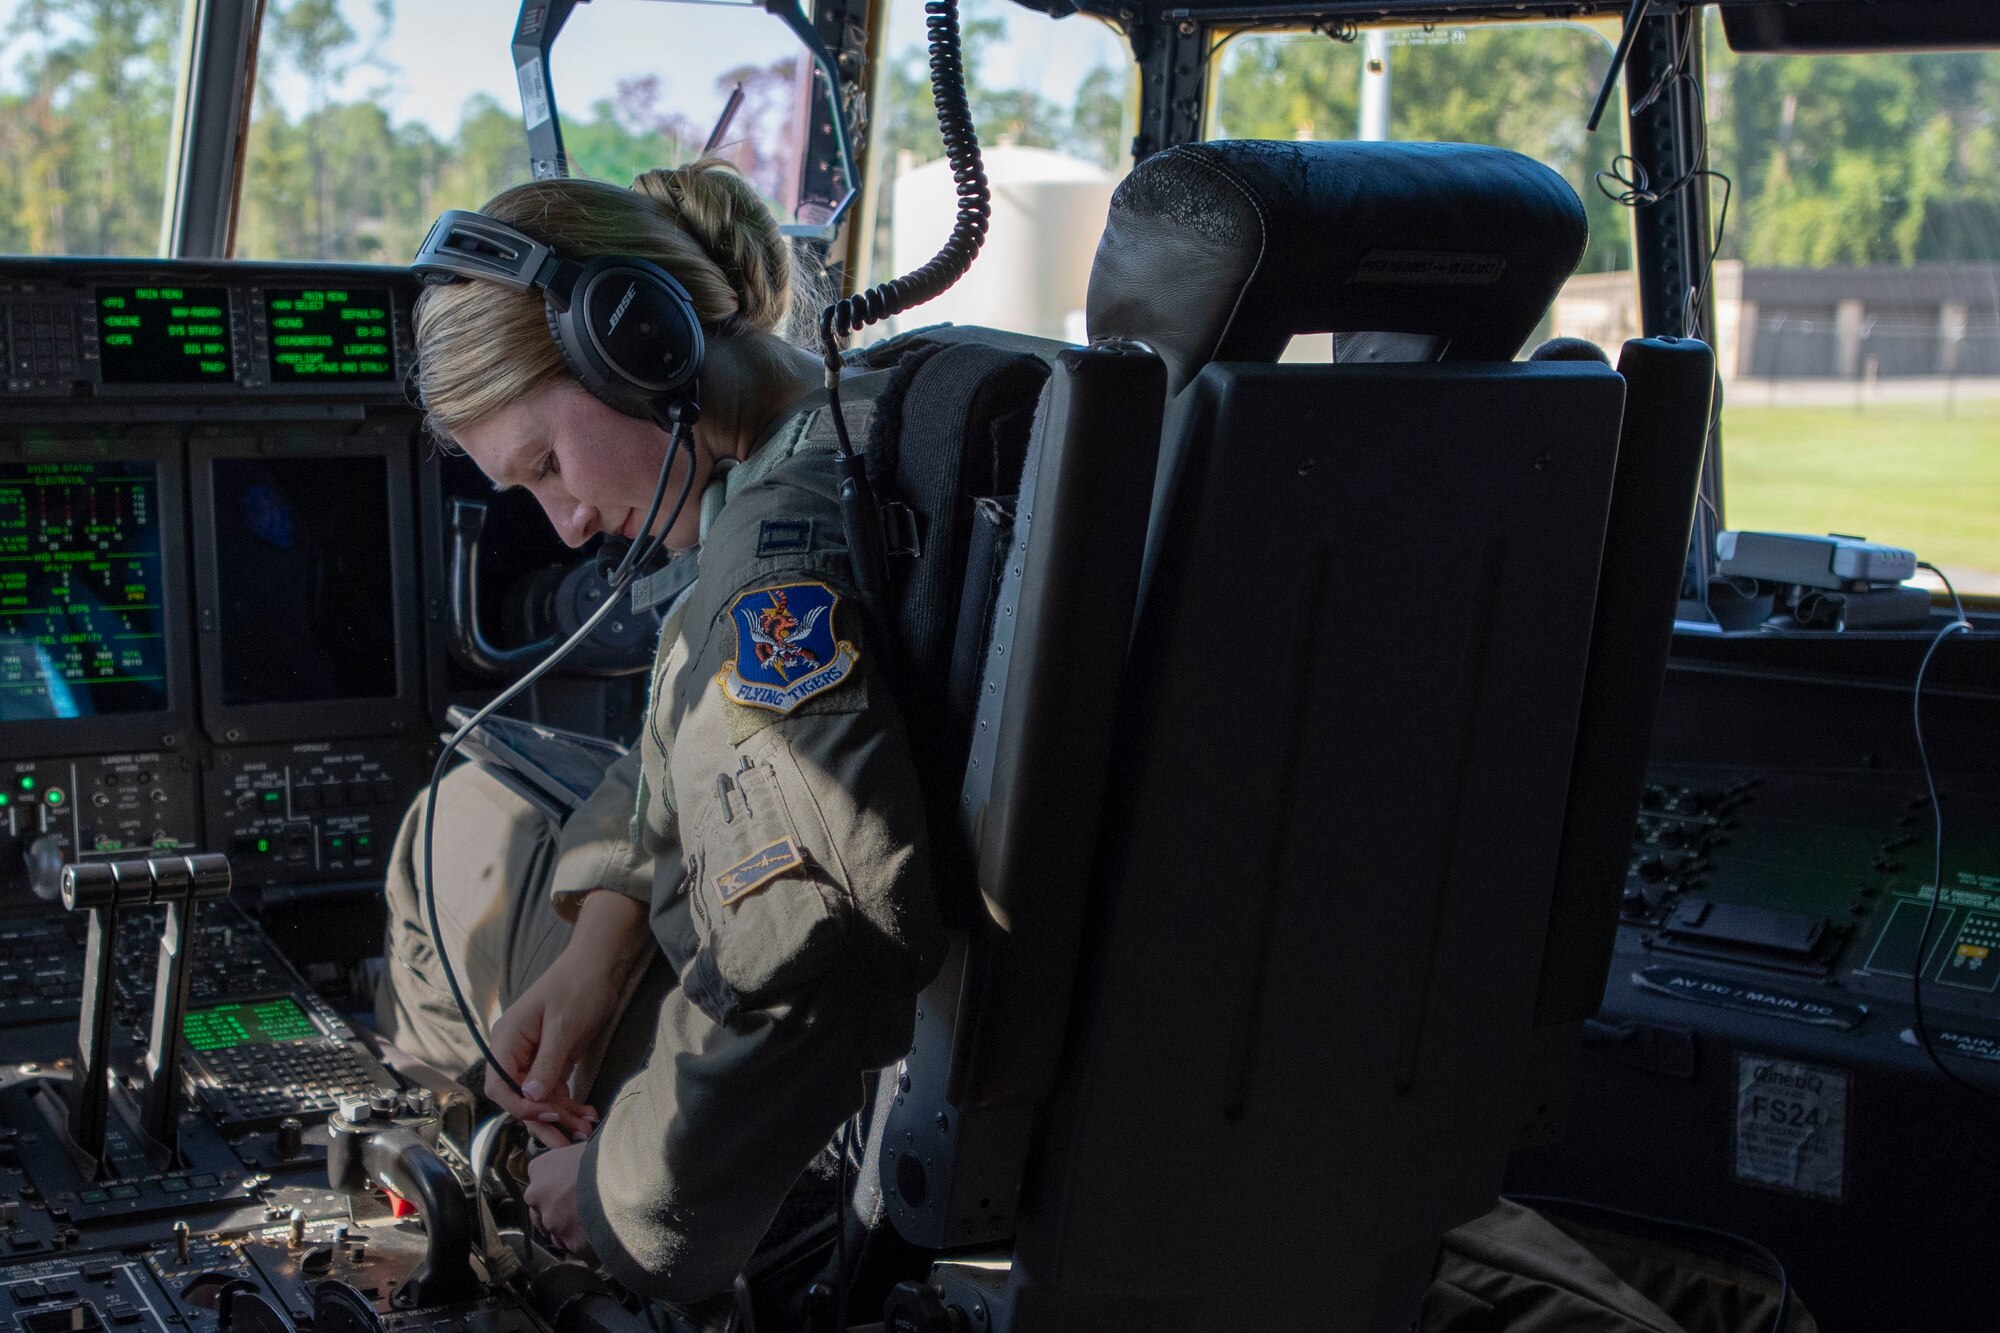 Capt. Sarah Edwards, 71st Rescue Squadron (RQS) pilot, prepares for takeoff in the cockpit of an HC-130J Combat King II before the airframe’s first flight to be operated by an all-female aircrew Sept. 6, 2019, at Moody Air Force Base, Ga. The 71st RQS provides rapidly deployable, expeditionary personnel recovery forces for contingency and crisis response operations worldwide. (U.S. Air Force photo by 2nd Lt. Kaylin P. Hankerson)